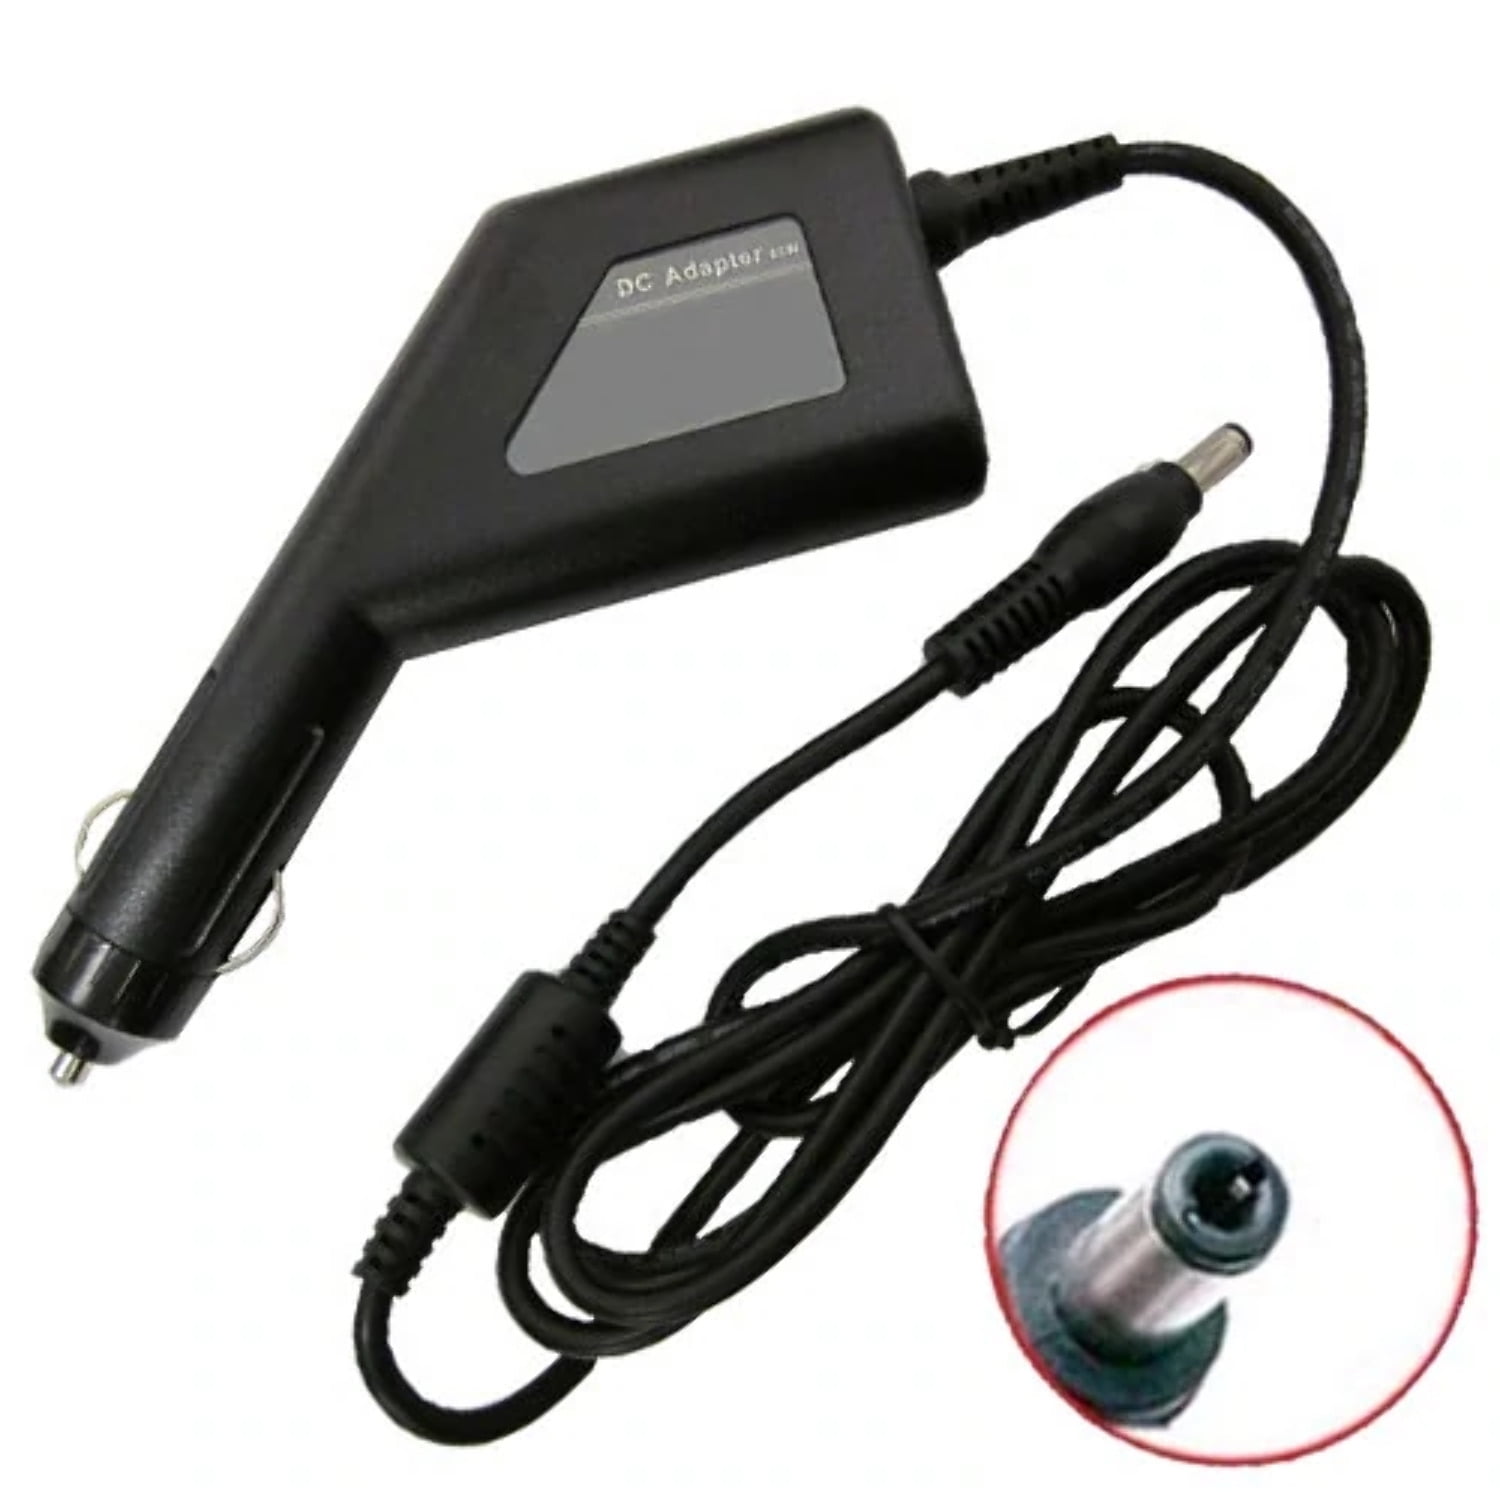 Works with JVC Everio GZ-EX210BE Camcorder VG121 Battery VG114 for JVC BN-VG107 Synergy Digital Camcorder Battery Charger 110/220V